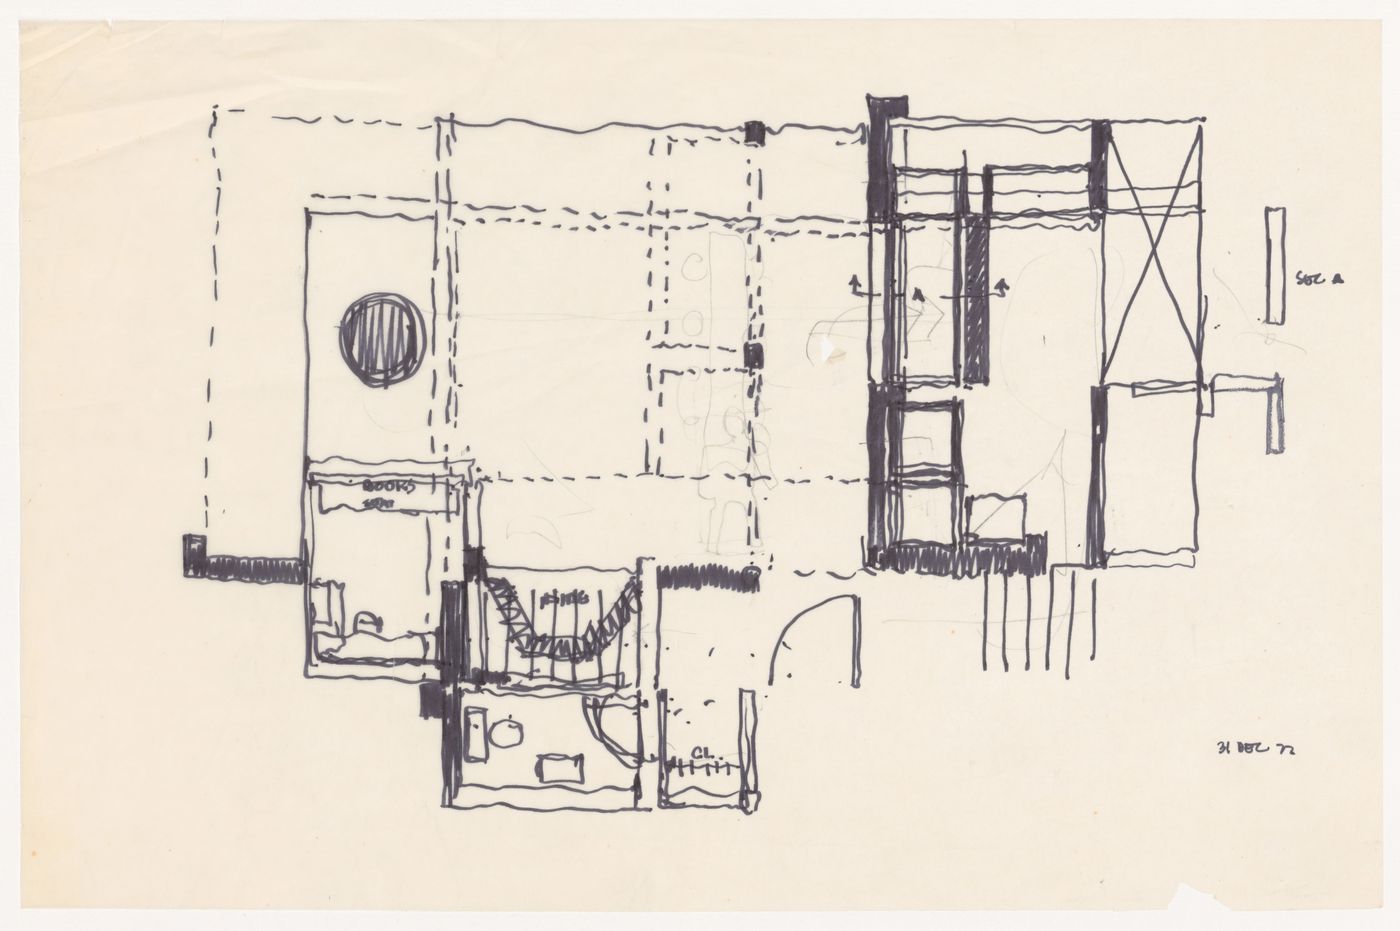 Sketch plan for House VI, Cornwall, Connecticut